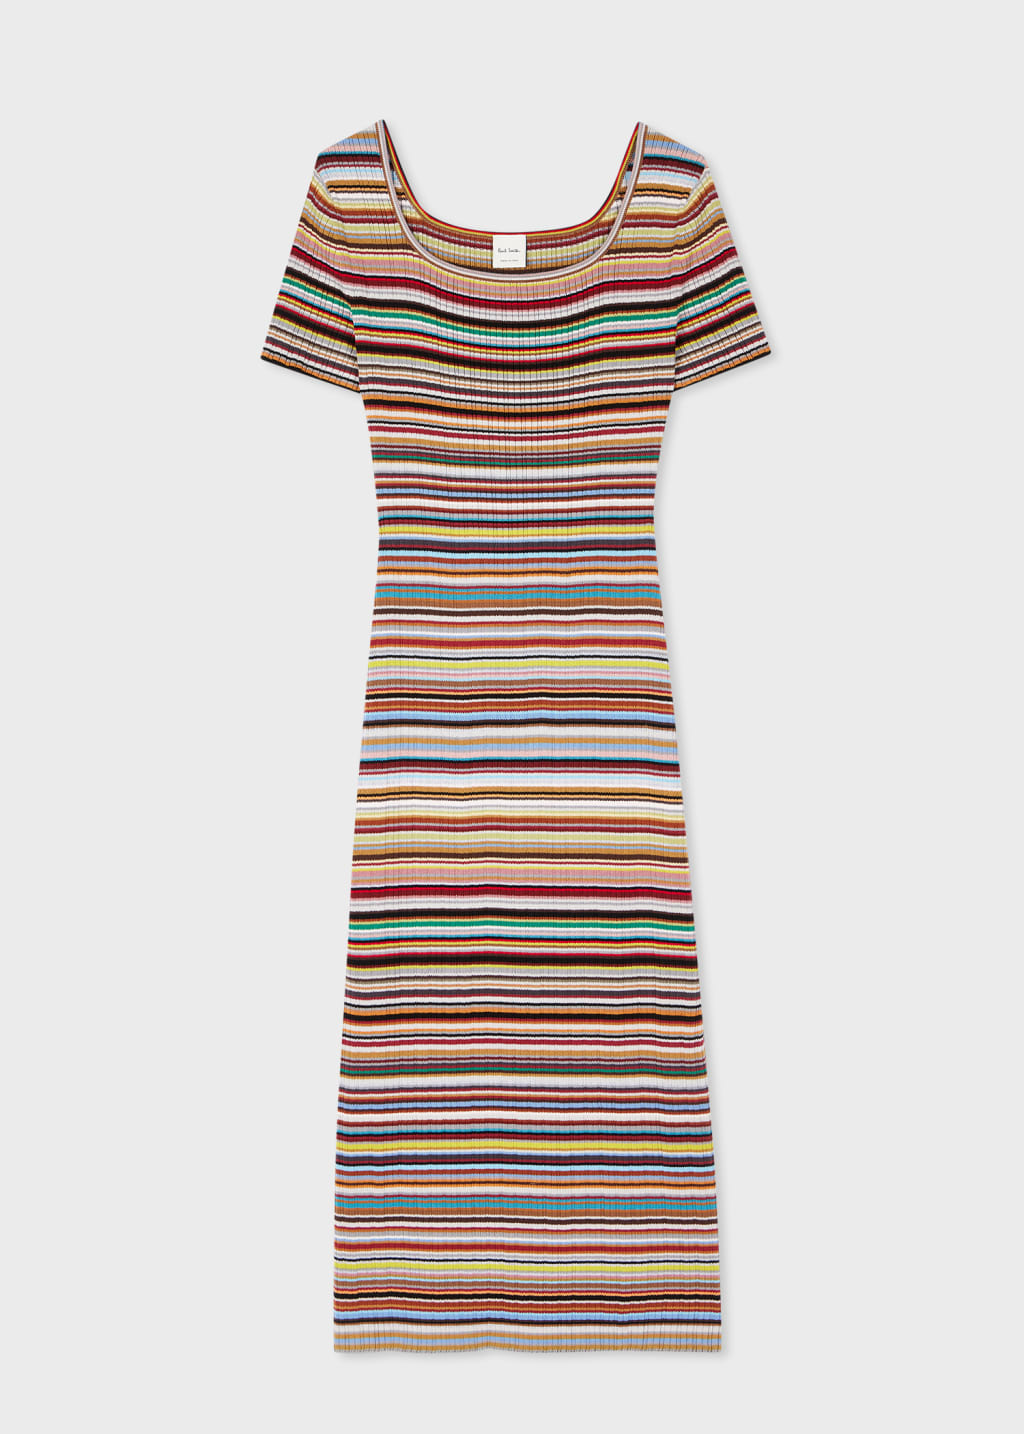 Front View - Women's 'Signature Stripe' Knitted Dress Paul Smith